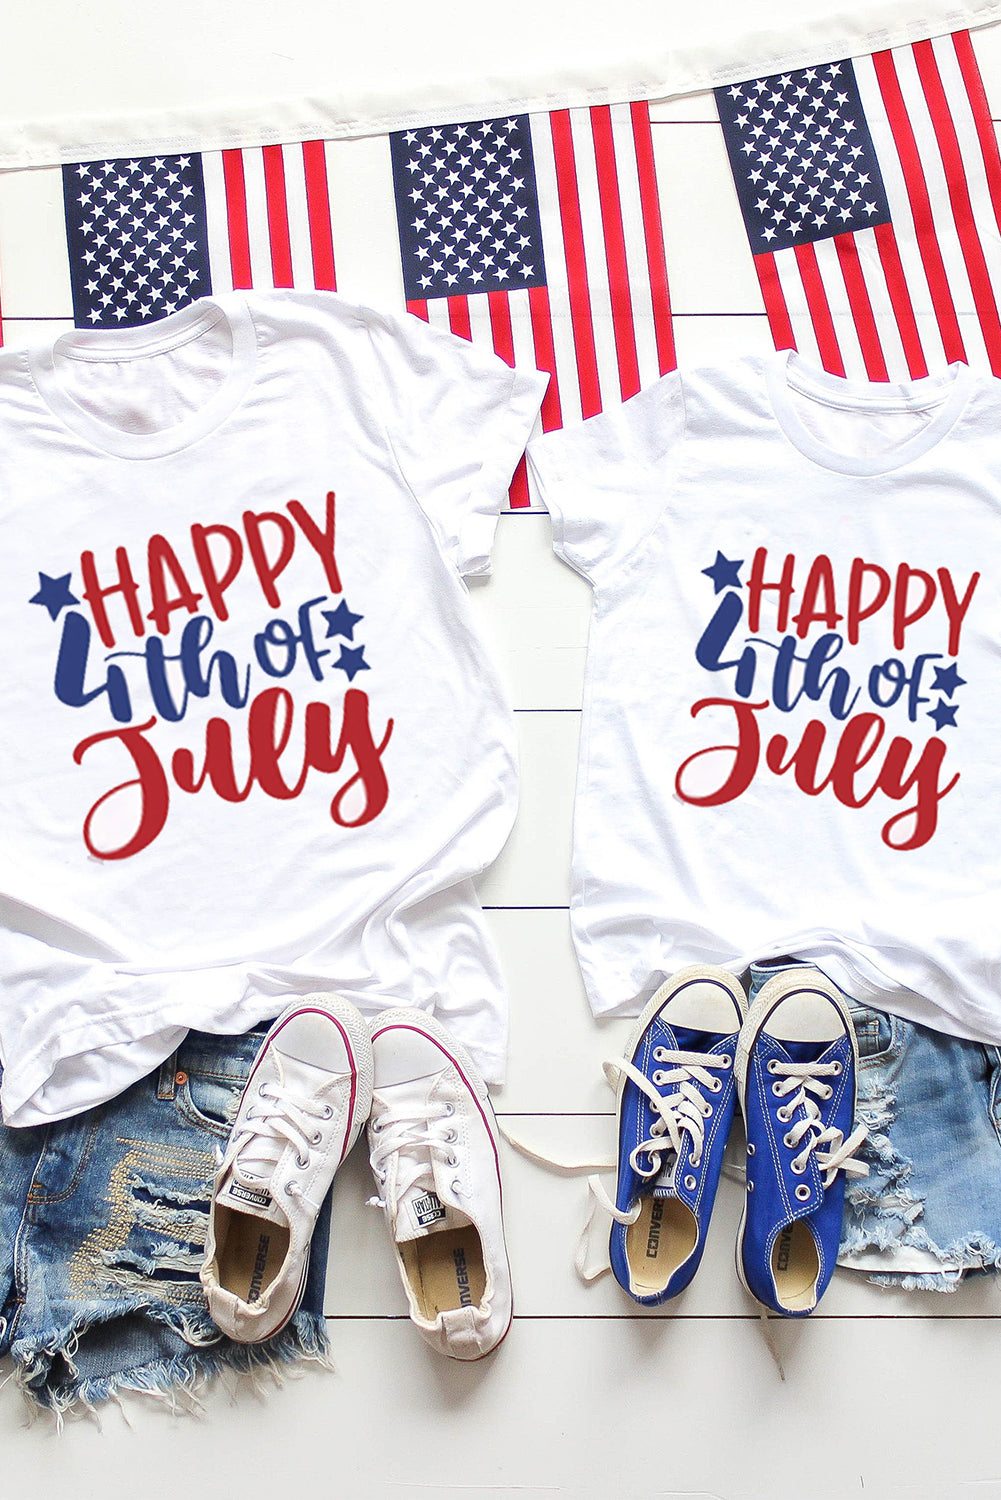 White HAPPY 4th OF JULY Printed Family Matching Graphic Tee White 95%Cotton+5%Elastane Family T-shirts JT's Designer Fashion